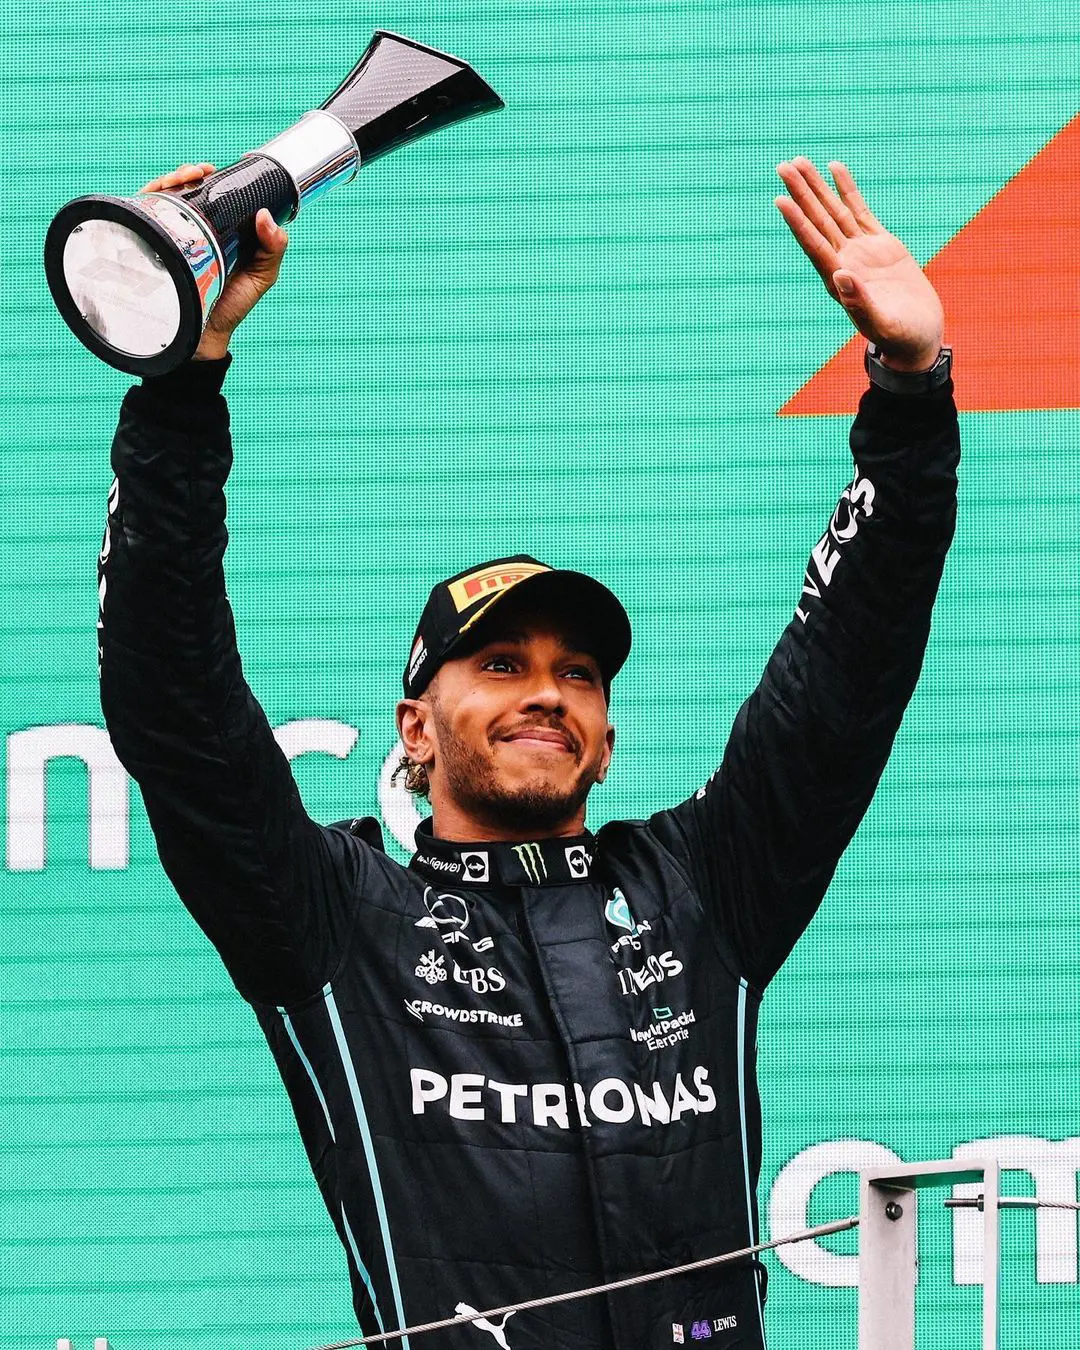 Lewis Hamilton, a British driver who competes in F1 racing, is one of the most recognized names in the sport of auto racing.